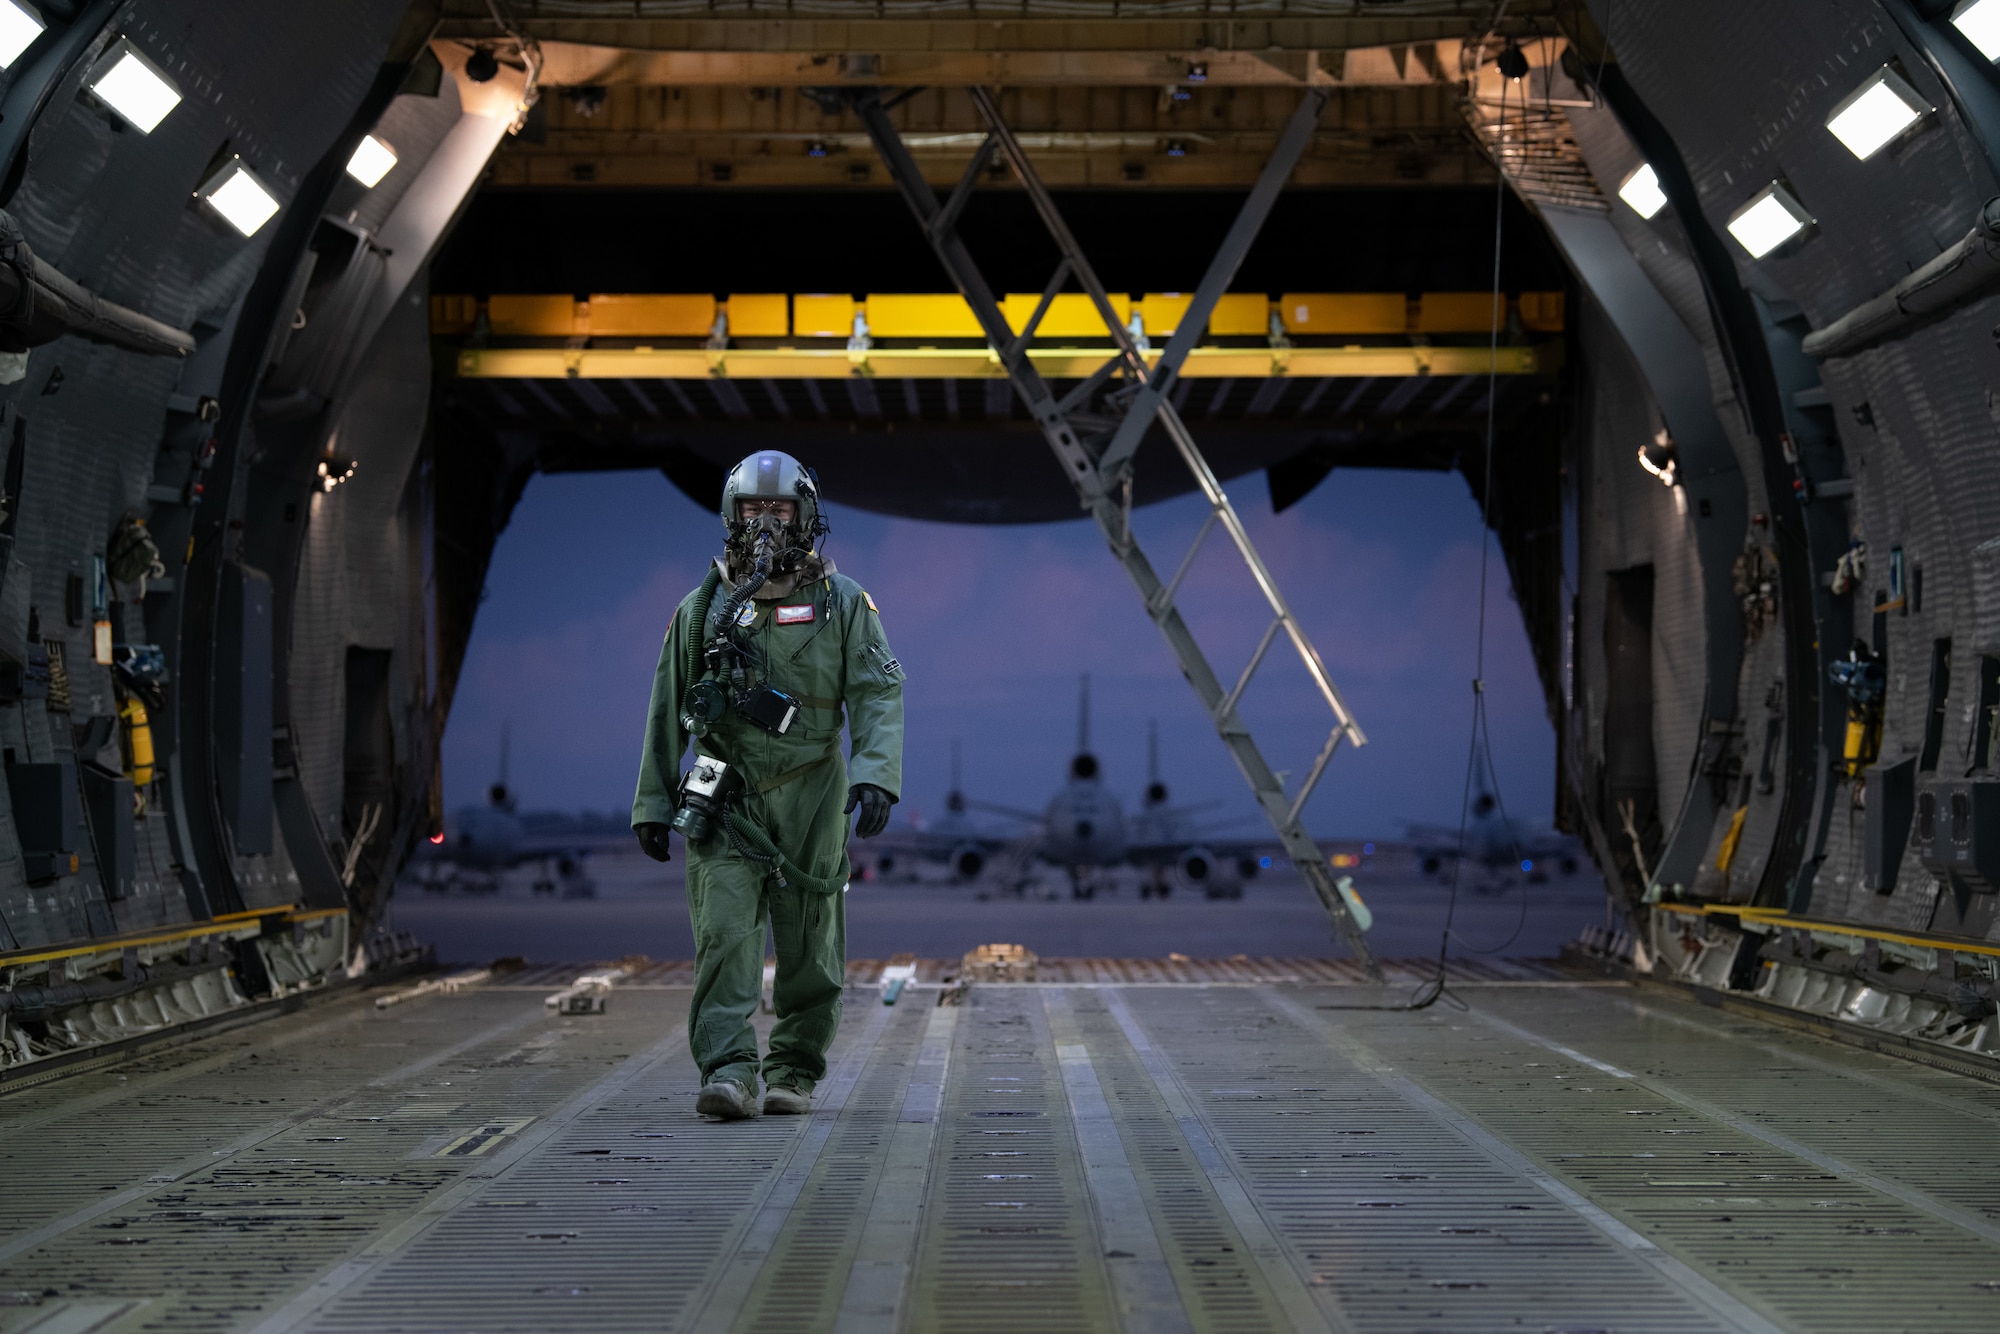 U.S. Air Force Staff Sgt. Cameron DiMatteo, 22nd Airlift Squadron loadmaster, walks inside a C-5M Super Galaxy during a base exercise Nov. 18, 2020, at Travis Air Force Base, California. Airmen at Travis AFB participate in readiness exercises to ensure they can operate in contested environments. (U.S. Air Force photo by Chustine Minoda)